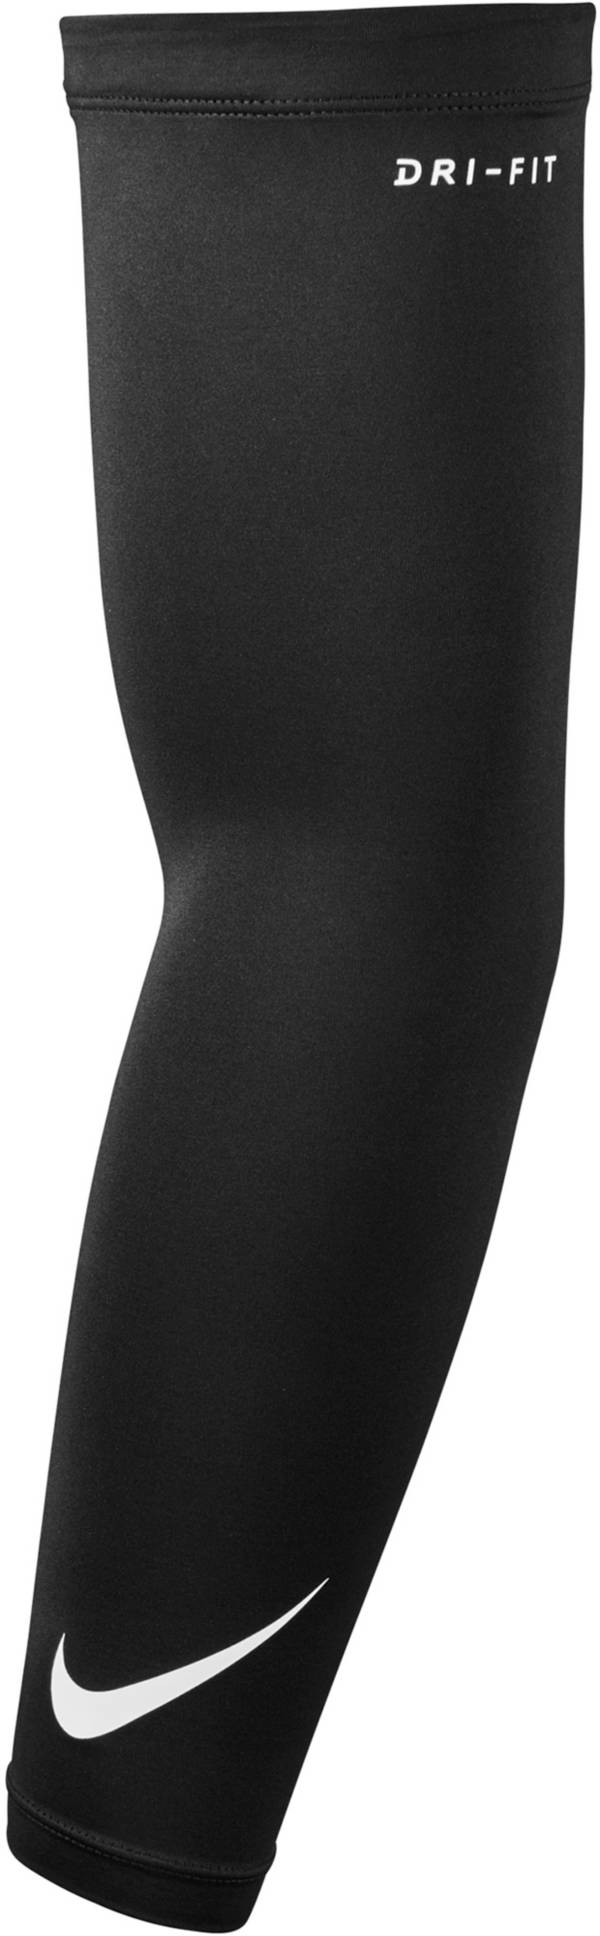 NIKE Pro Dri Fit 3.0 WHITE Compression Football Arm Sleeves Mens S